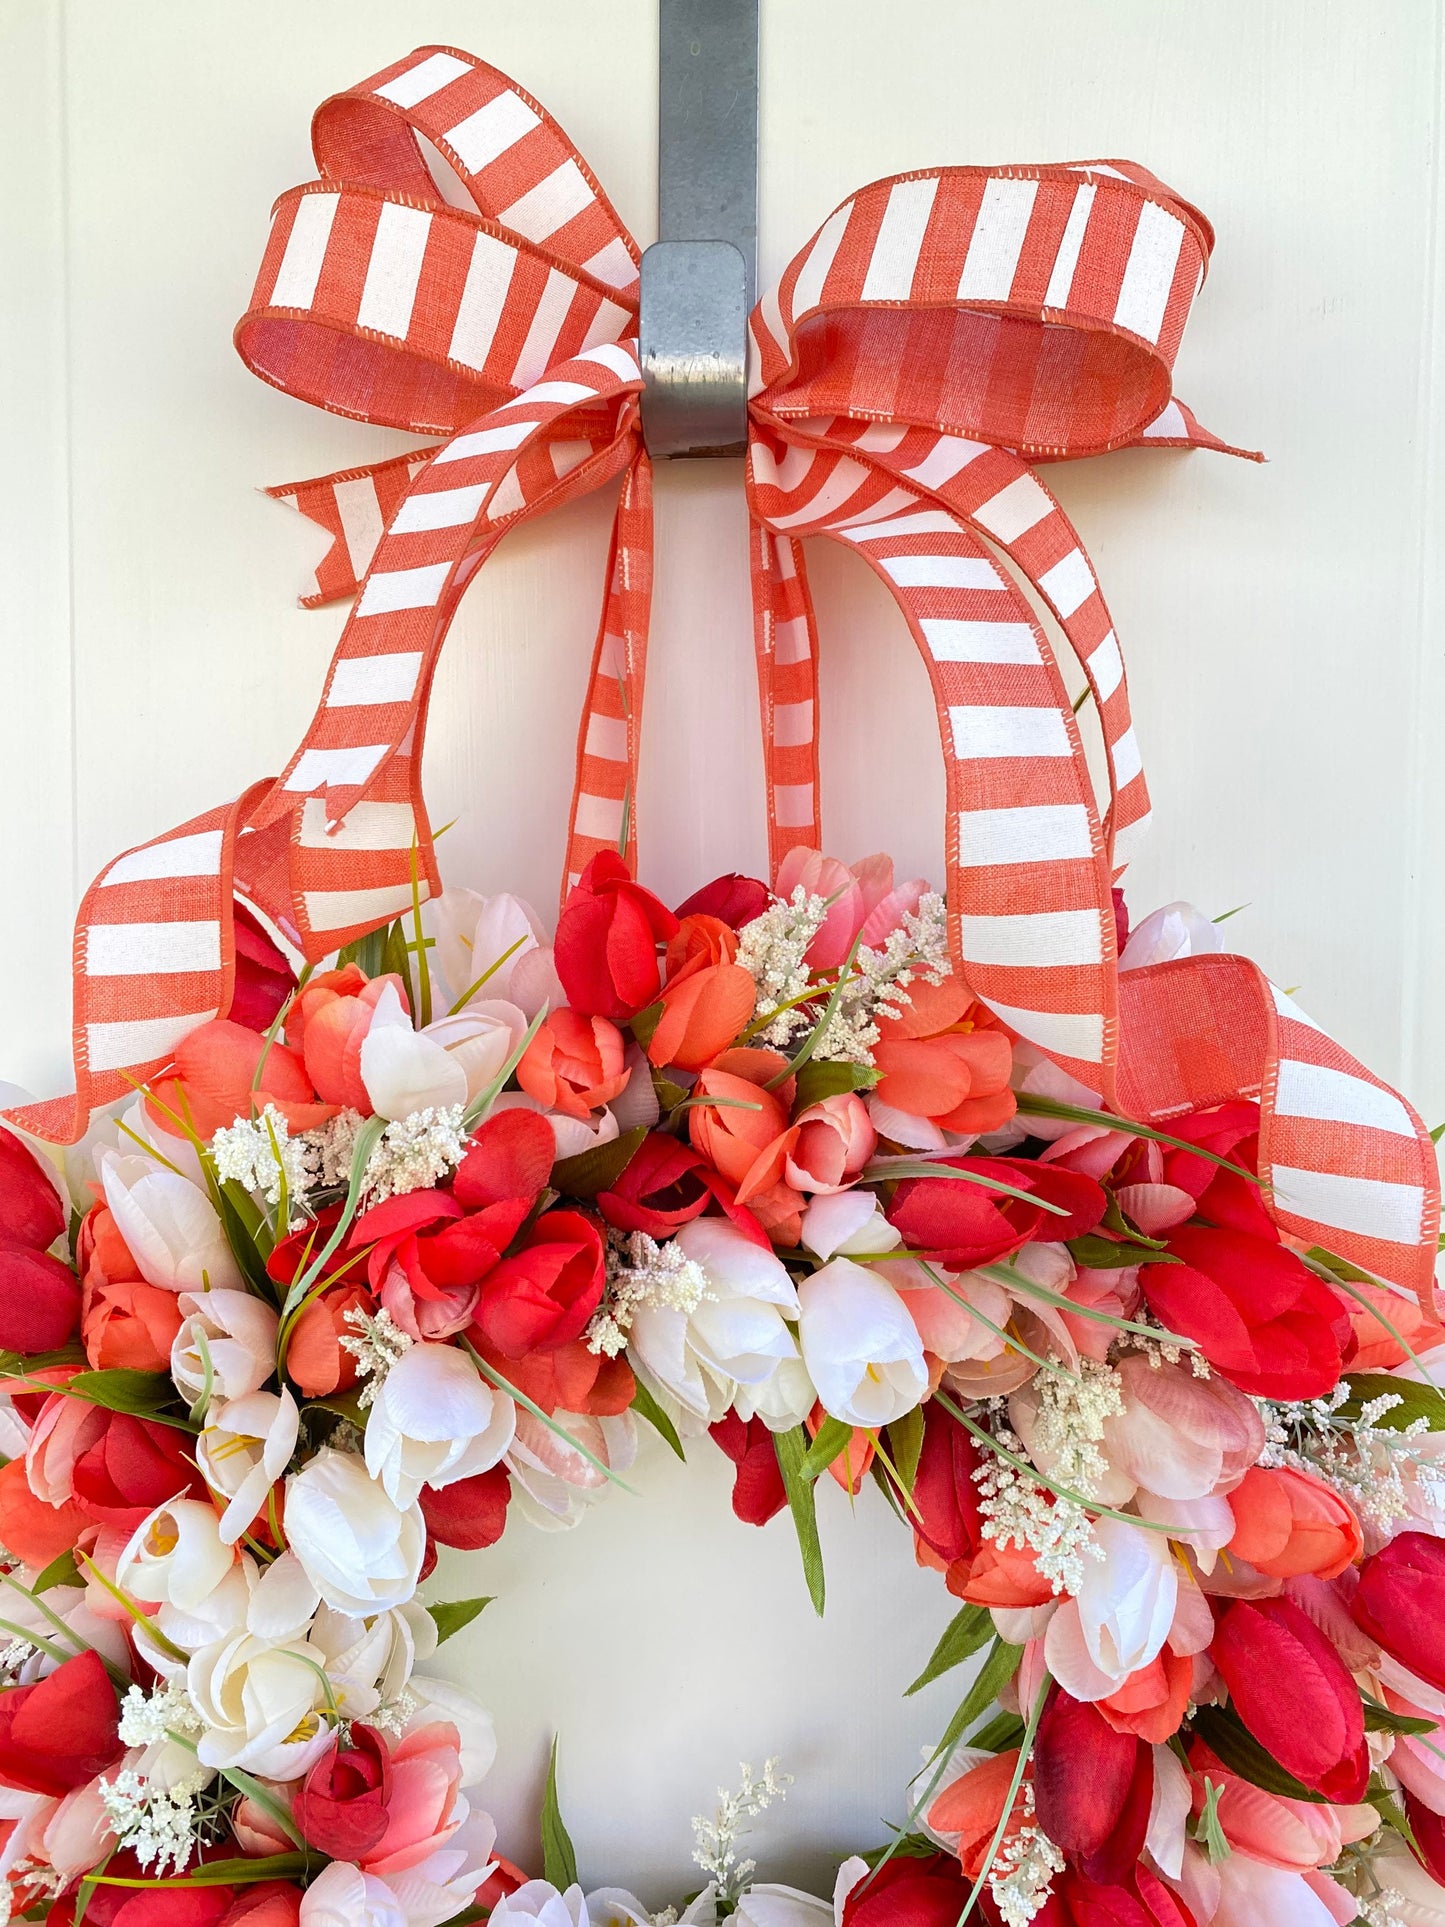 Red Coral and White Tulip Wreath for Front Door, Door Hanger Spring Decoration, Interior Foyer or Above Mantel Wall Décor Mantle